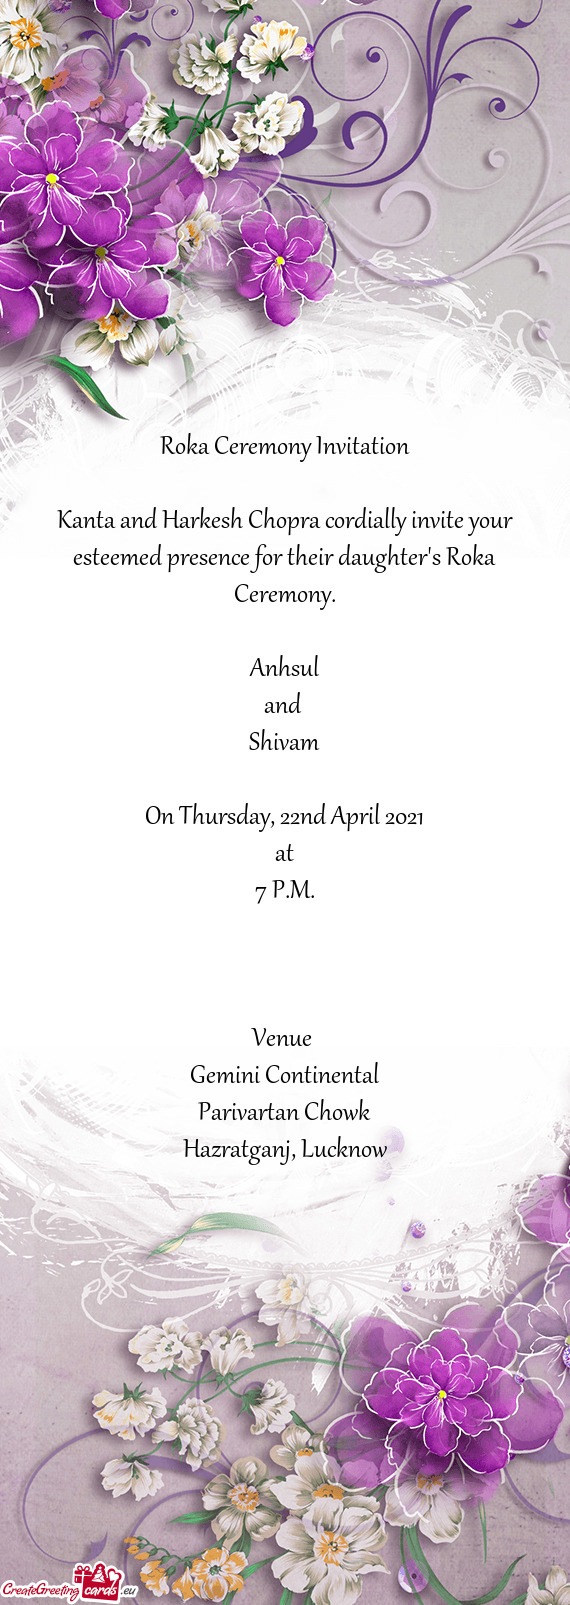 Kanta and Harkesh Chopra cordially invite your esteemed presence for their daughter